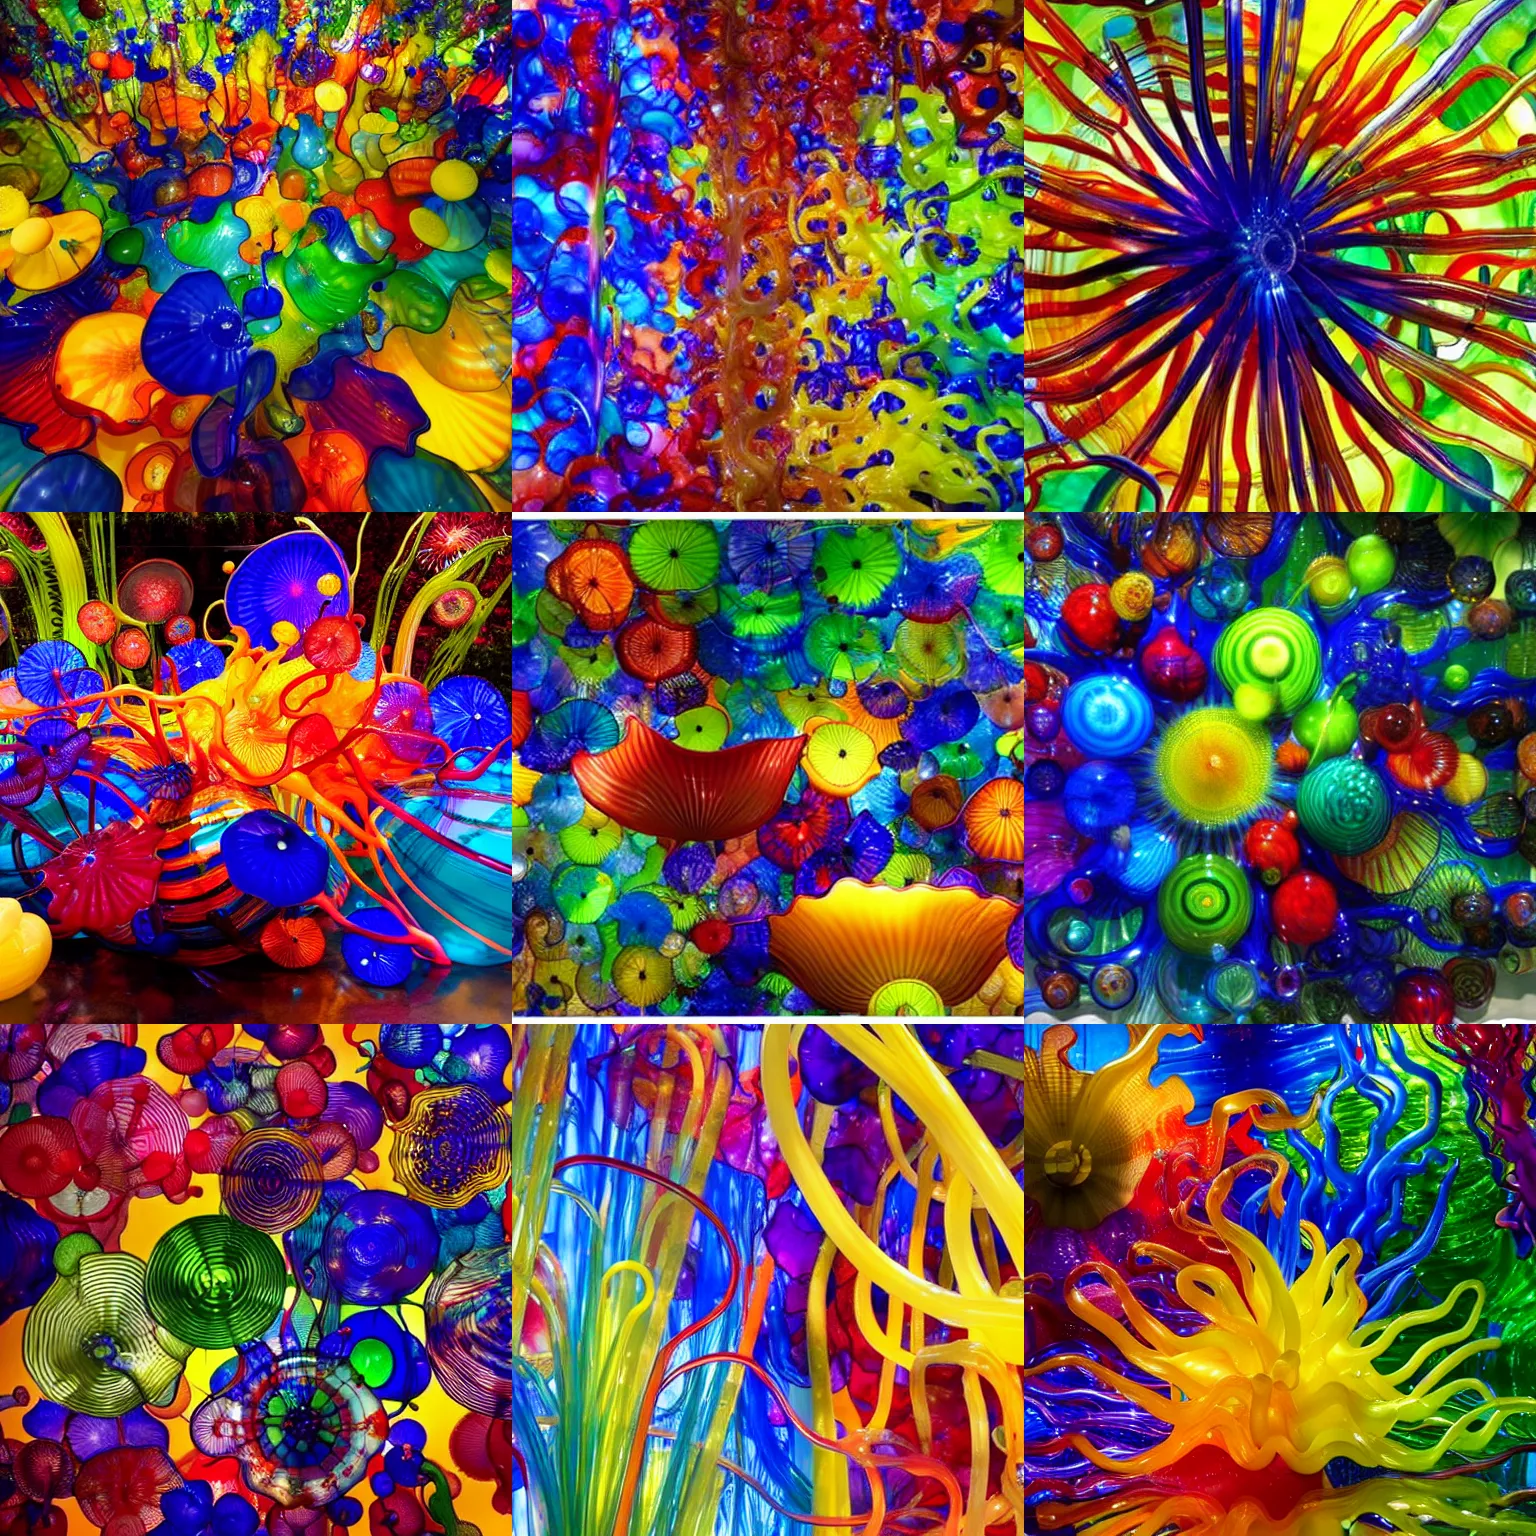 Prompt: artwork by dale chihuly